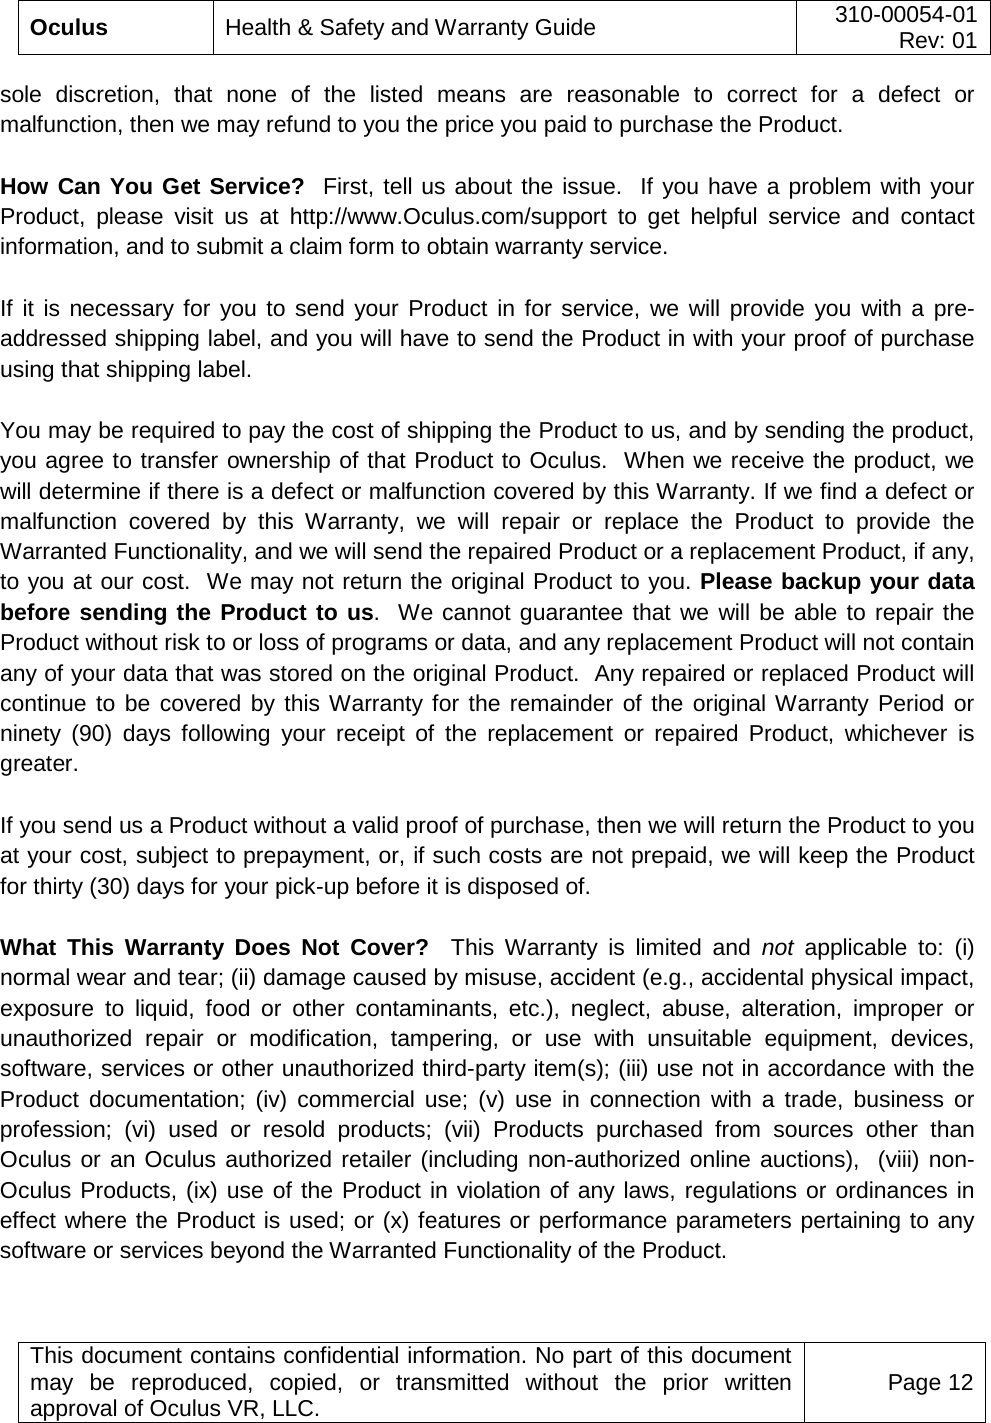  Oculus Health &amp; Safety and Warranty Guide 310-00054-01  Rev: 01   This document contains confidential information. No part of this document may be reproduced, copied, or transmitted without the prior written approval of Oculus VR, LLC. Page 12  sole discretion, that none of the listed means are reasonable to correct for a defect or malfunction, then we may refund to you the price you paid to purchase the Product.   How Can You Get Service?  First, tell us about the issue.  If you have a problem with your Product, please visit us at http://www.Oculus.com/support to get helpful service and contact information, and to submit a claim form to obtain warranty service.  If it is necessary for you to send your Product in for service, we will provide you with a pre-addressed shipping label, and you will have to send the Product in with your proof of purchase using that shipping label.   You may be required to pay the cost of shipping the Product to us, and by sending the product, you agree to transfer ownership of that Product to Oculus.  When we receive the product, we will determine if there is a defect or malfunction covered by this Warranty. If we find a defect or malfunction covered by this Warranty, we will repair or replace the Product to provide the Warranted Functionality, and we will send the repaired Product or a replacement Product, if any, to you at our cost.  We may not return the original Product to you. Please backup your data before sending the Product to us.  We cannot guarantee that we will be able to repair the Product without risk to or loss of programs or data, and any replacement Product will not contain any of your data that was stored on the original Product.  Any repaired or replaced Product will continue to be covered by this Warranty for the remainder of the original Warranty Period or ninety (90) days following your receipt of the replacement or repaired Product, whichever is greater. If you send us a Product without a valid proof of purchase, then we will return the Product to you at your cost, subject to prepayment, or, if such costs are not prepaid, we will keep the Product for thirty (30) days for your pick-up before it is disposed of. What This Warranty Does Not Cover?  This Warranty is limited and not applicable to: (i) normal wear and tear; (ii) damage caused by misuse, accident (e.g., accidental physical impact, exposure to liquid, food or other contaminants, etc.), neglect, abuse, alteration, improper or unauthorized repair or modification, tampering, or use with unsuitable equipment, devices, software, services or other unauthorized third-party item(s); (iii) use not in accordance with the Product documentation; (iv) commercial use; (v) use in connection with a trade, business or profession; (vi) used or resold products; (vii) Products purchased from sources other than Oculus or an Oculus authorized retailer (including non-authorized online auctions),  (viii) non-Oculus Products, (ix) use of the Product in violation of any laws, regulations or ordinances in effect where the Product is used; or (x) features or performance parameters pertaining to any software or services beyond the Warranted Functionality of the Product.  